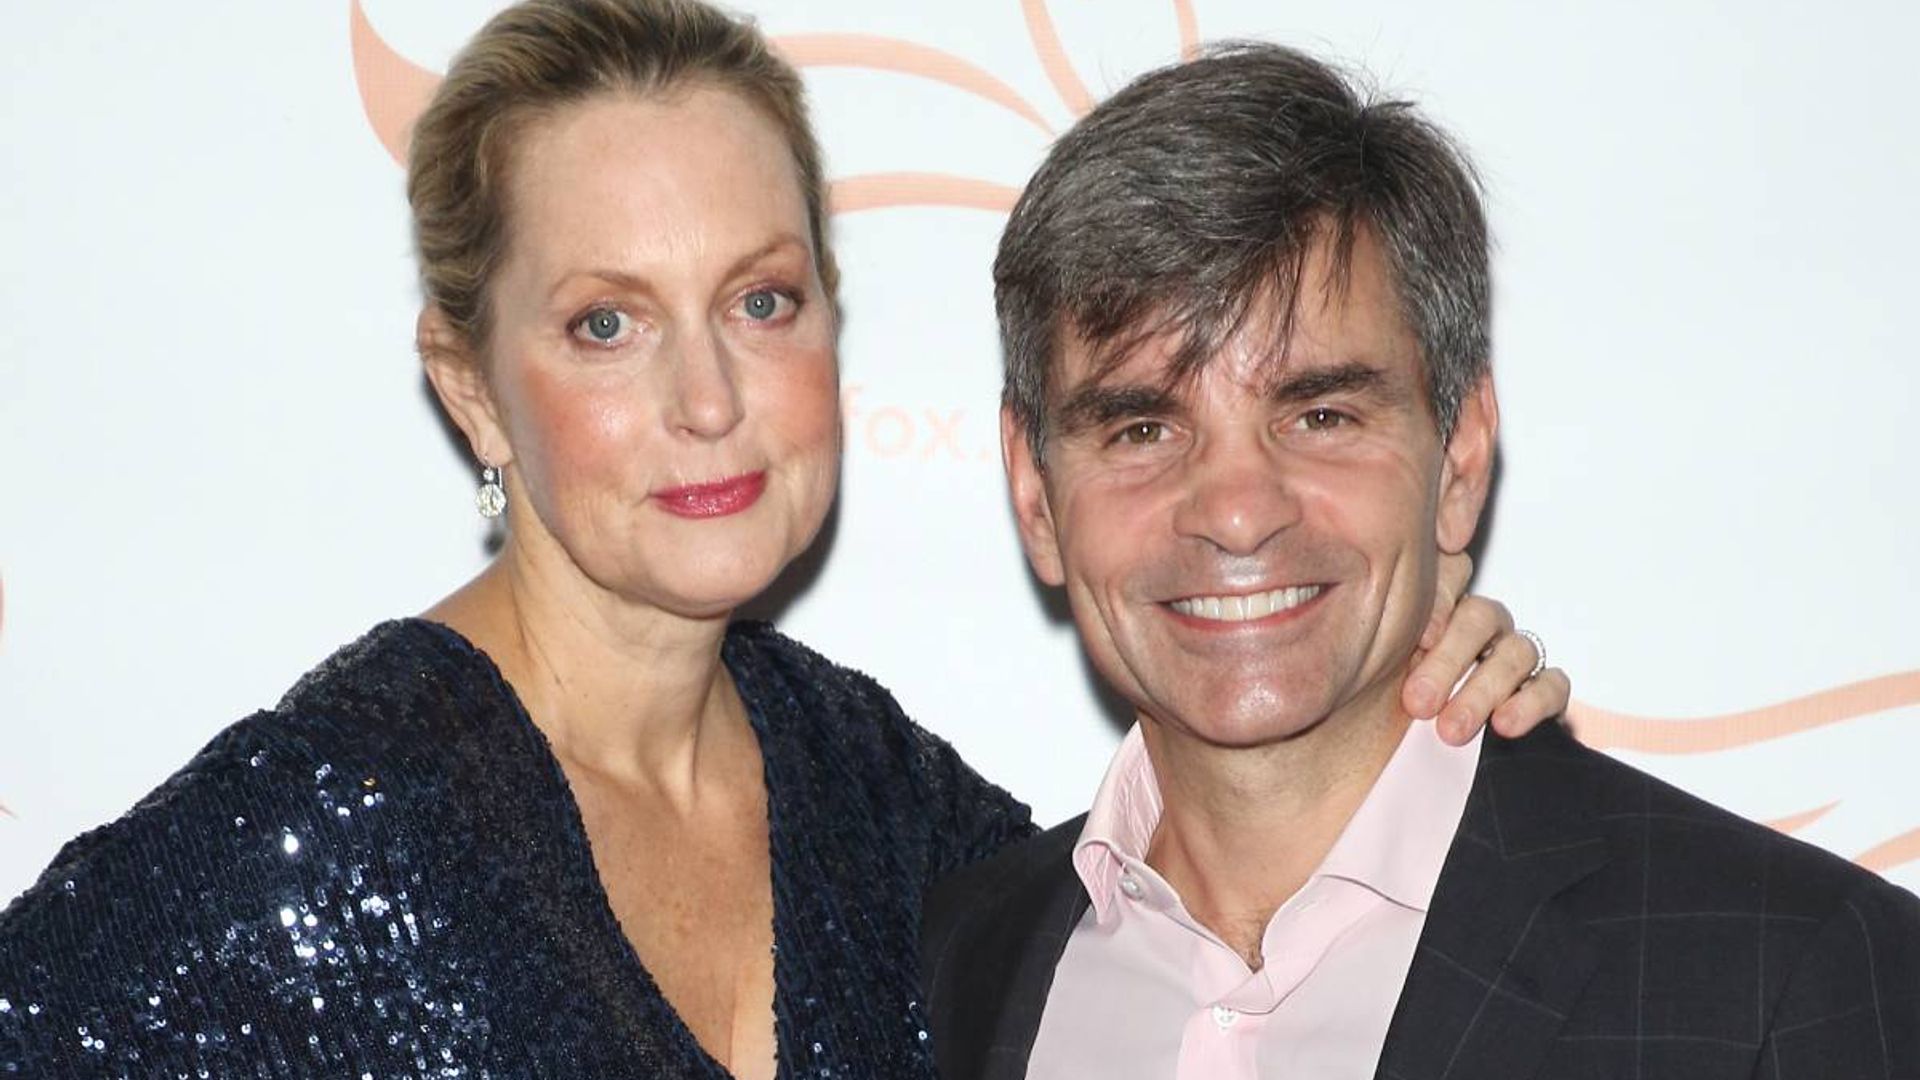 Ali Wentworth's family tragedy in her own words will break your heart